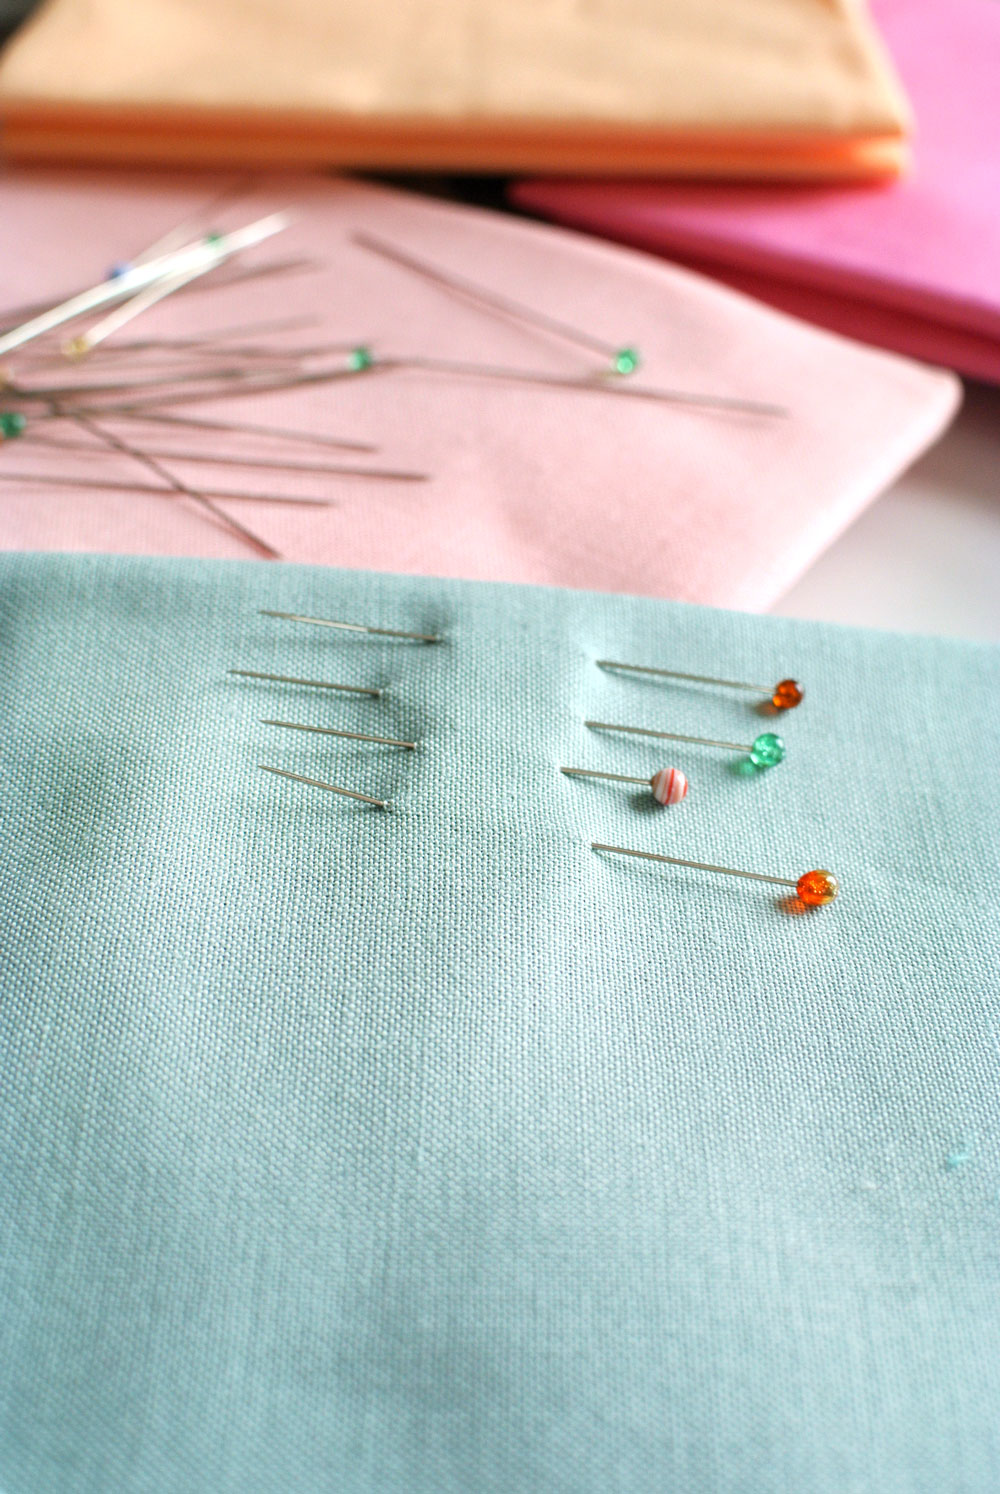 quilting-pins